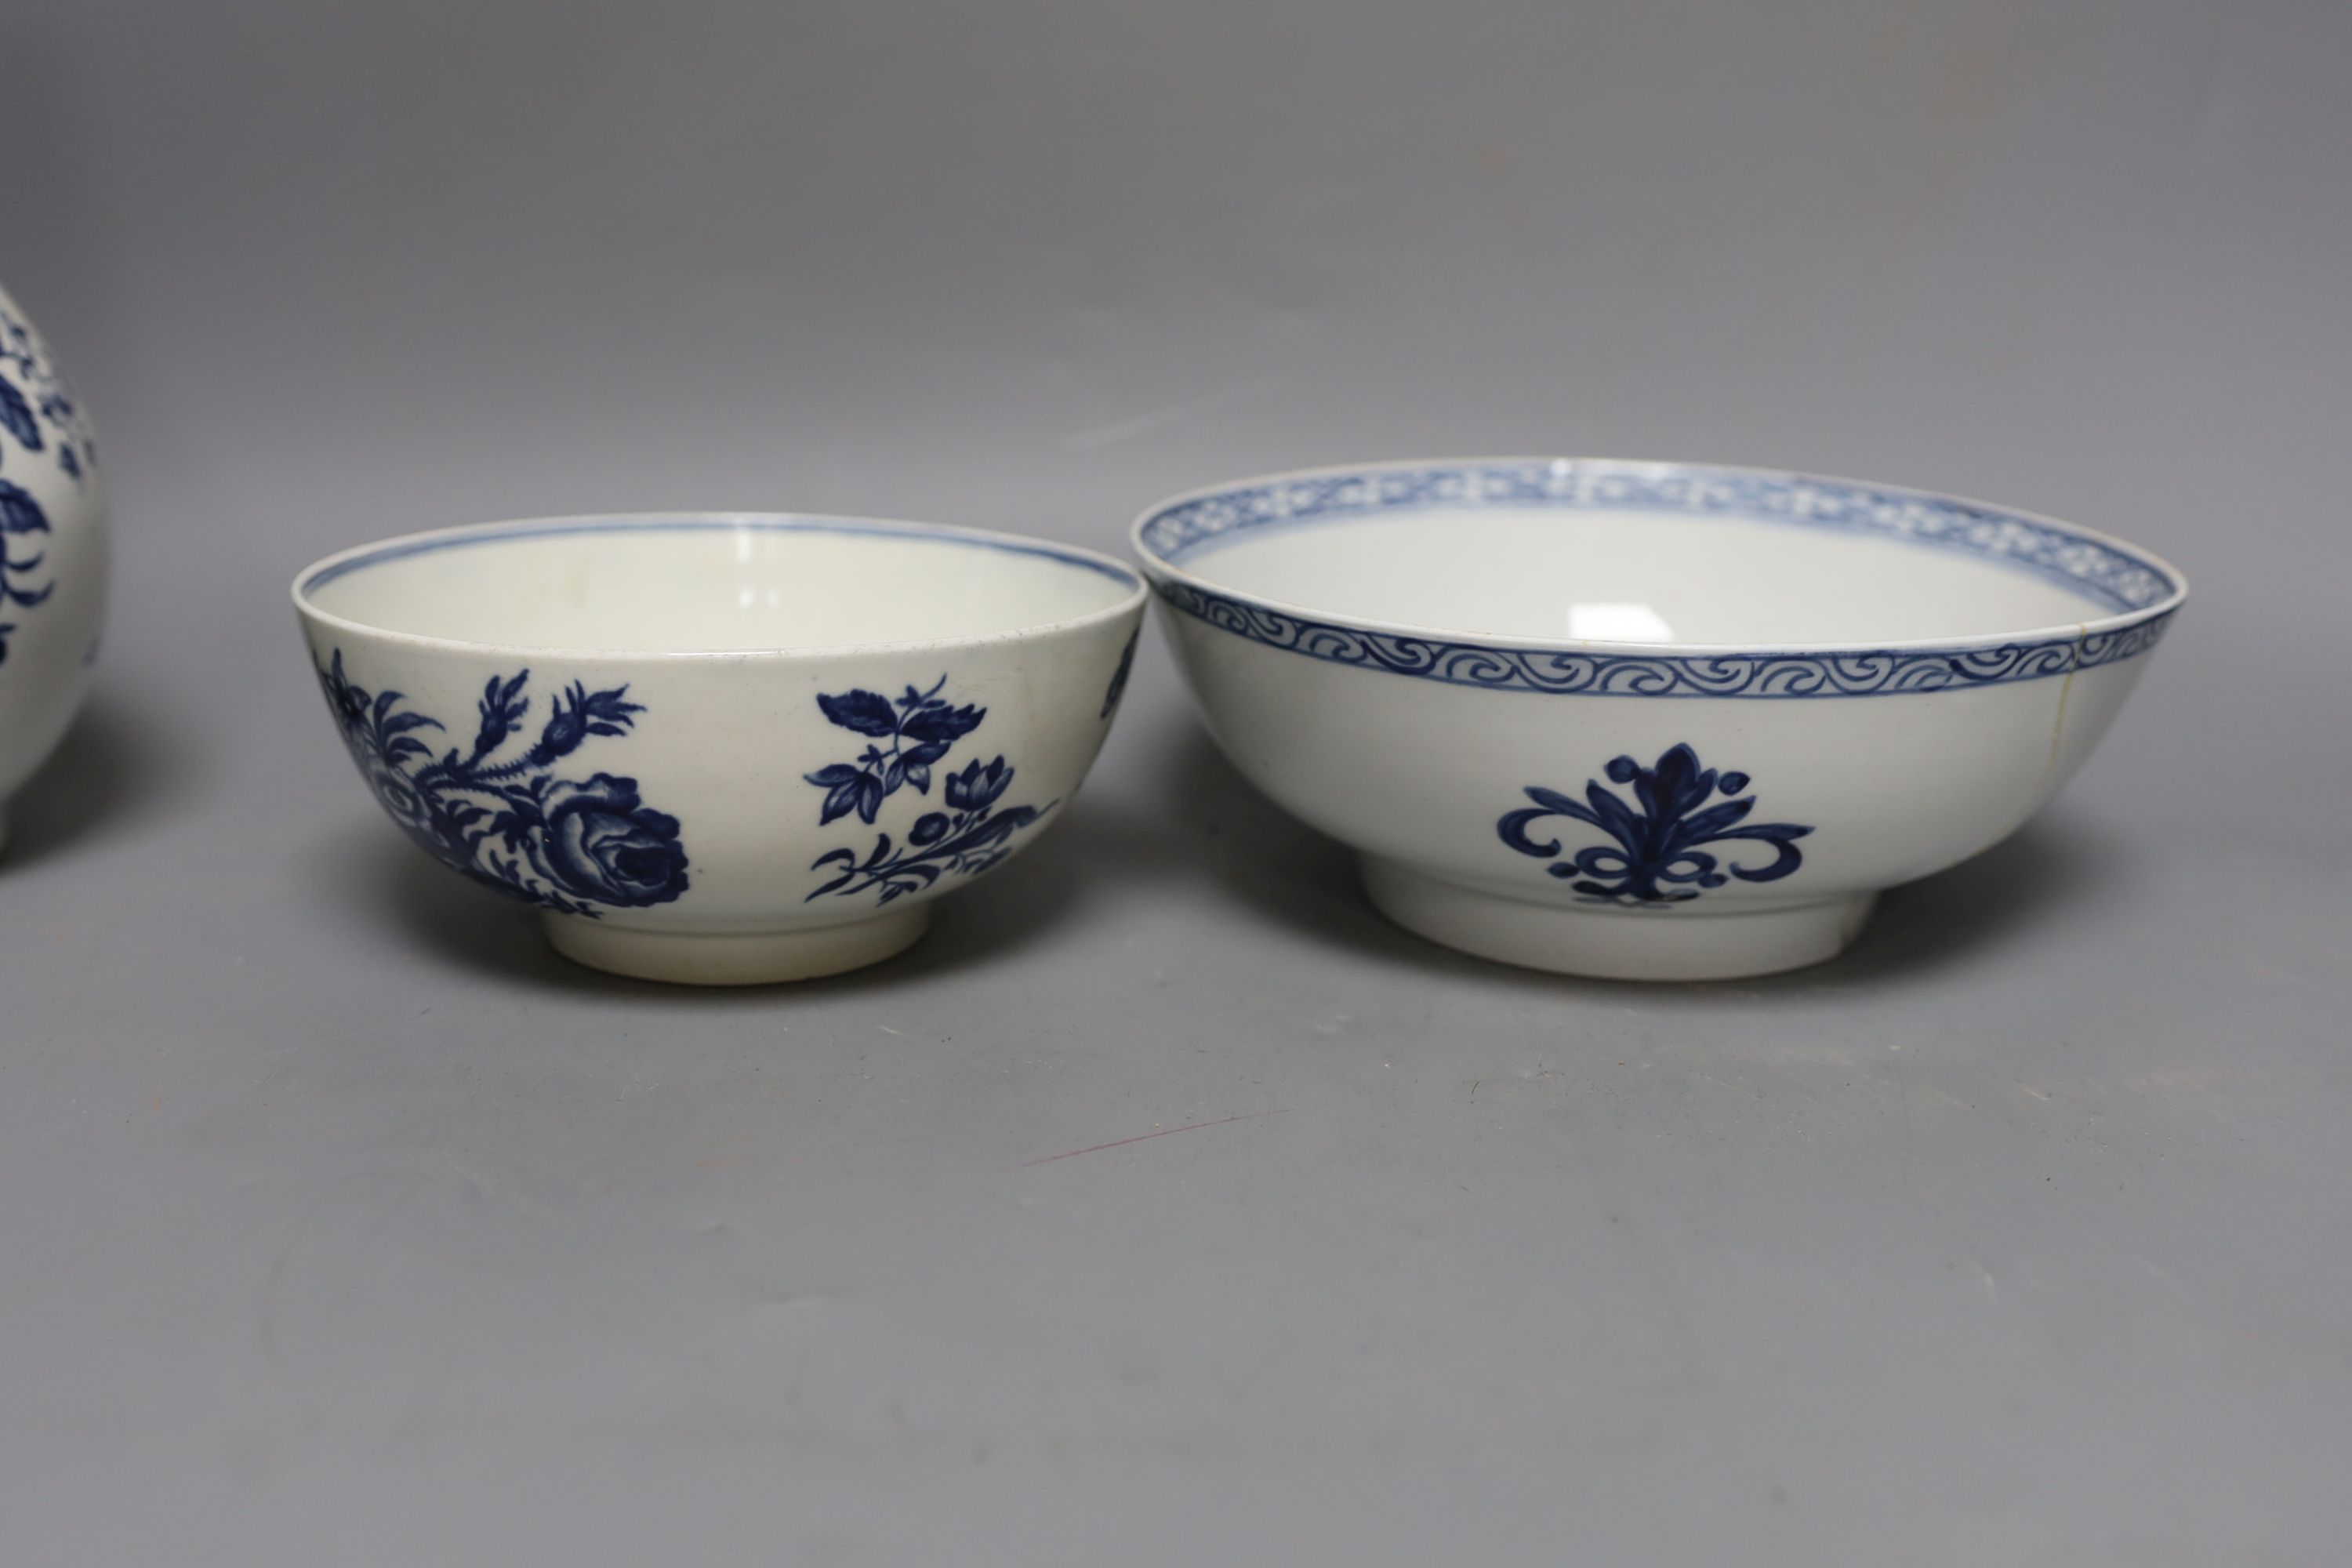 A Chaffers Liverpool rare bowl, a Worcester bowl, a mug with the Gilliflower pattern, three - Image 9 of 18